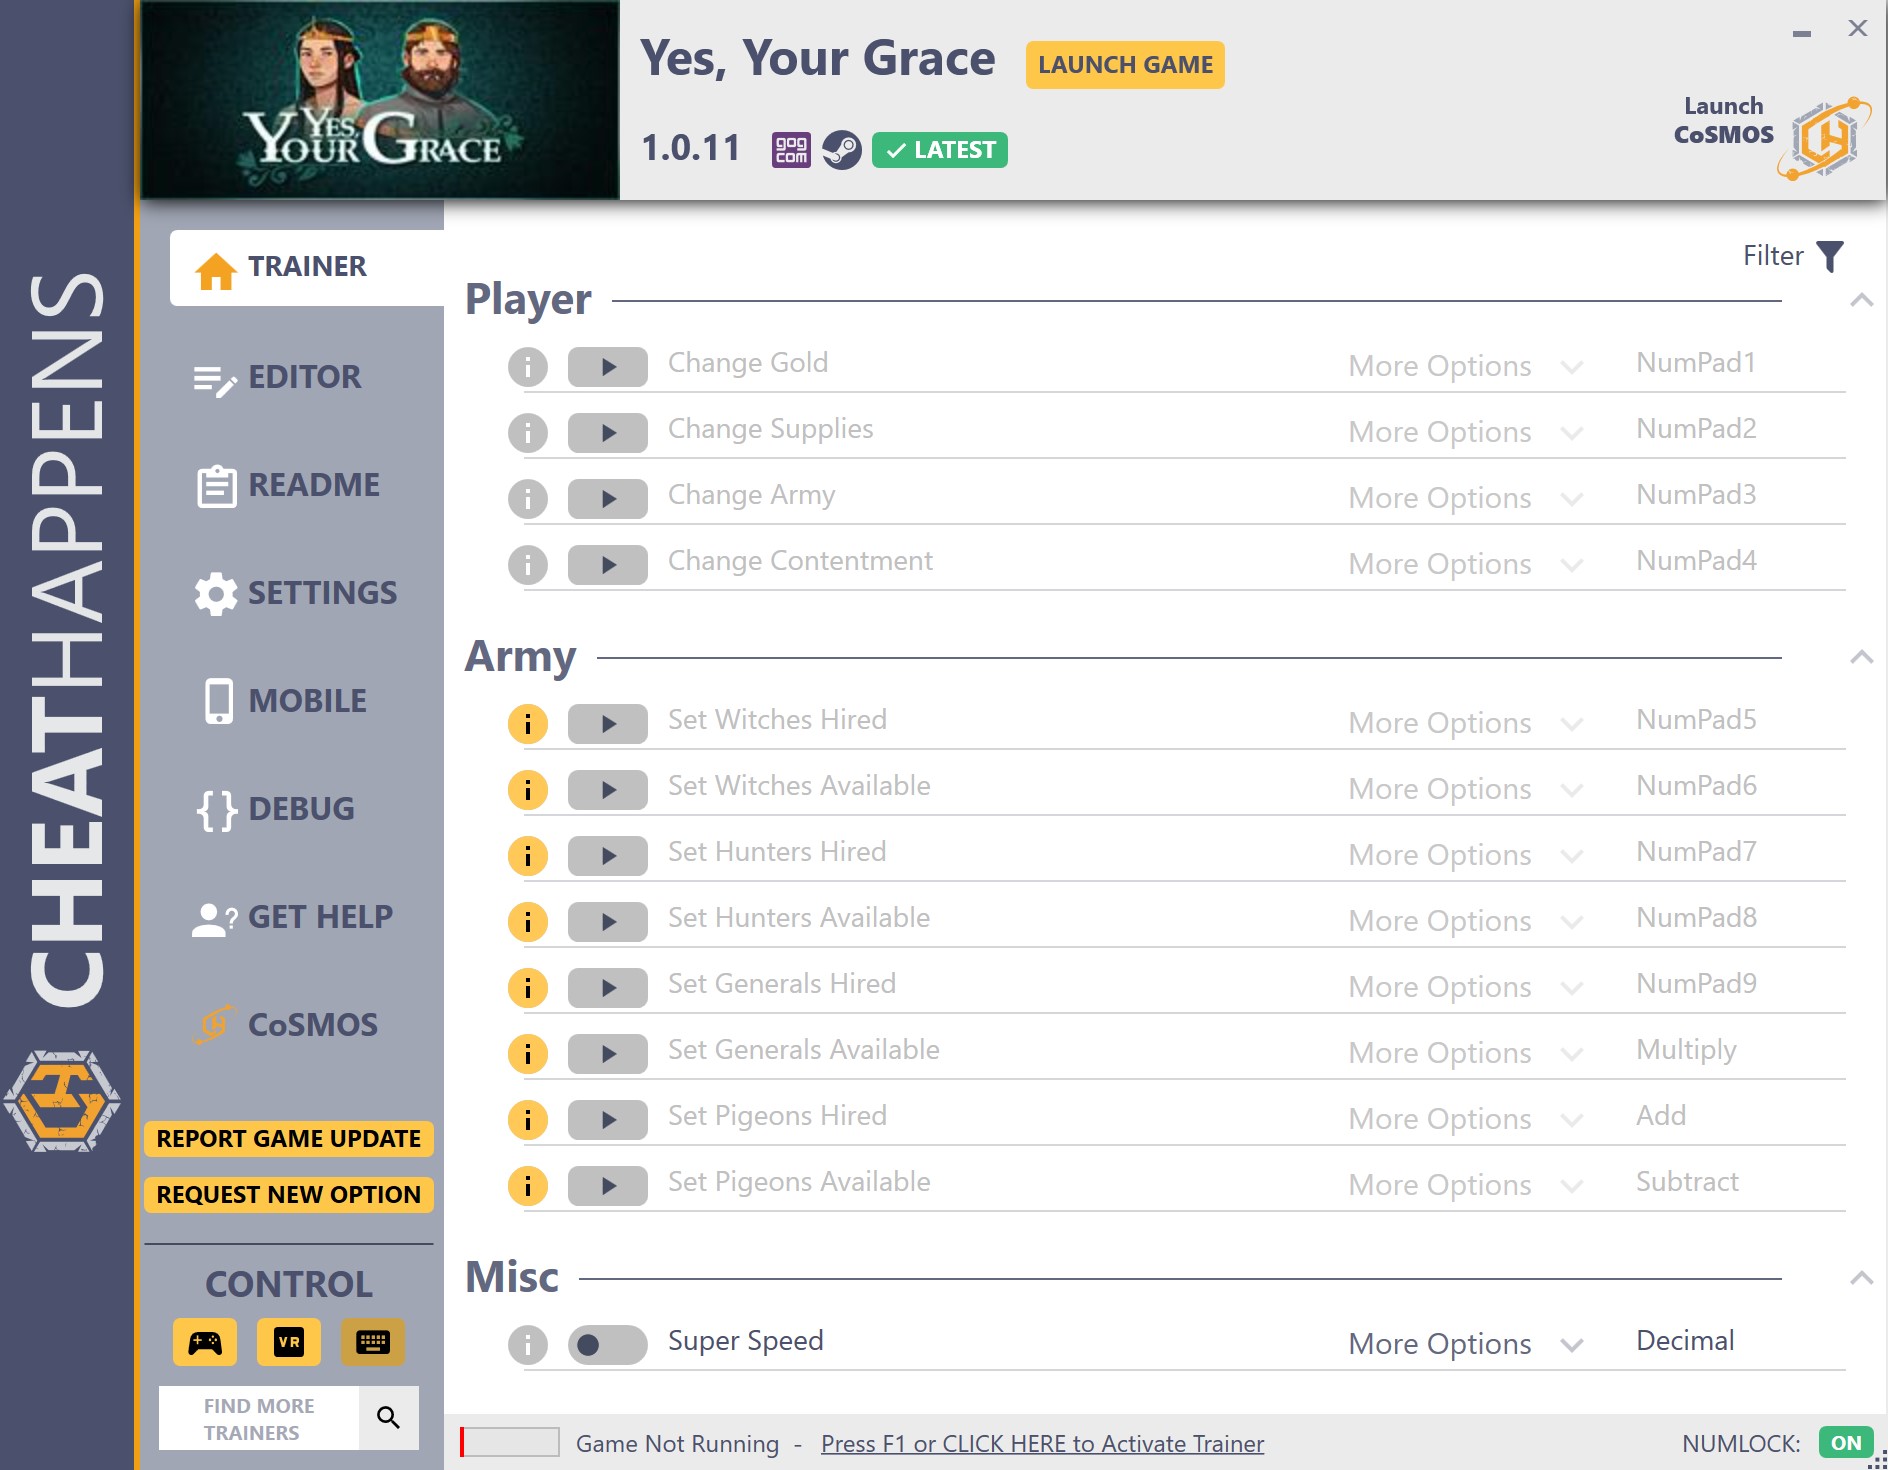 Yes, Your Grace v1.0.11 Trainer